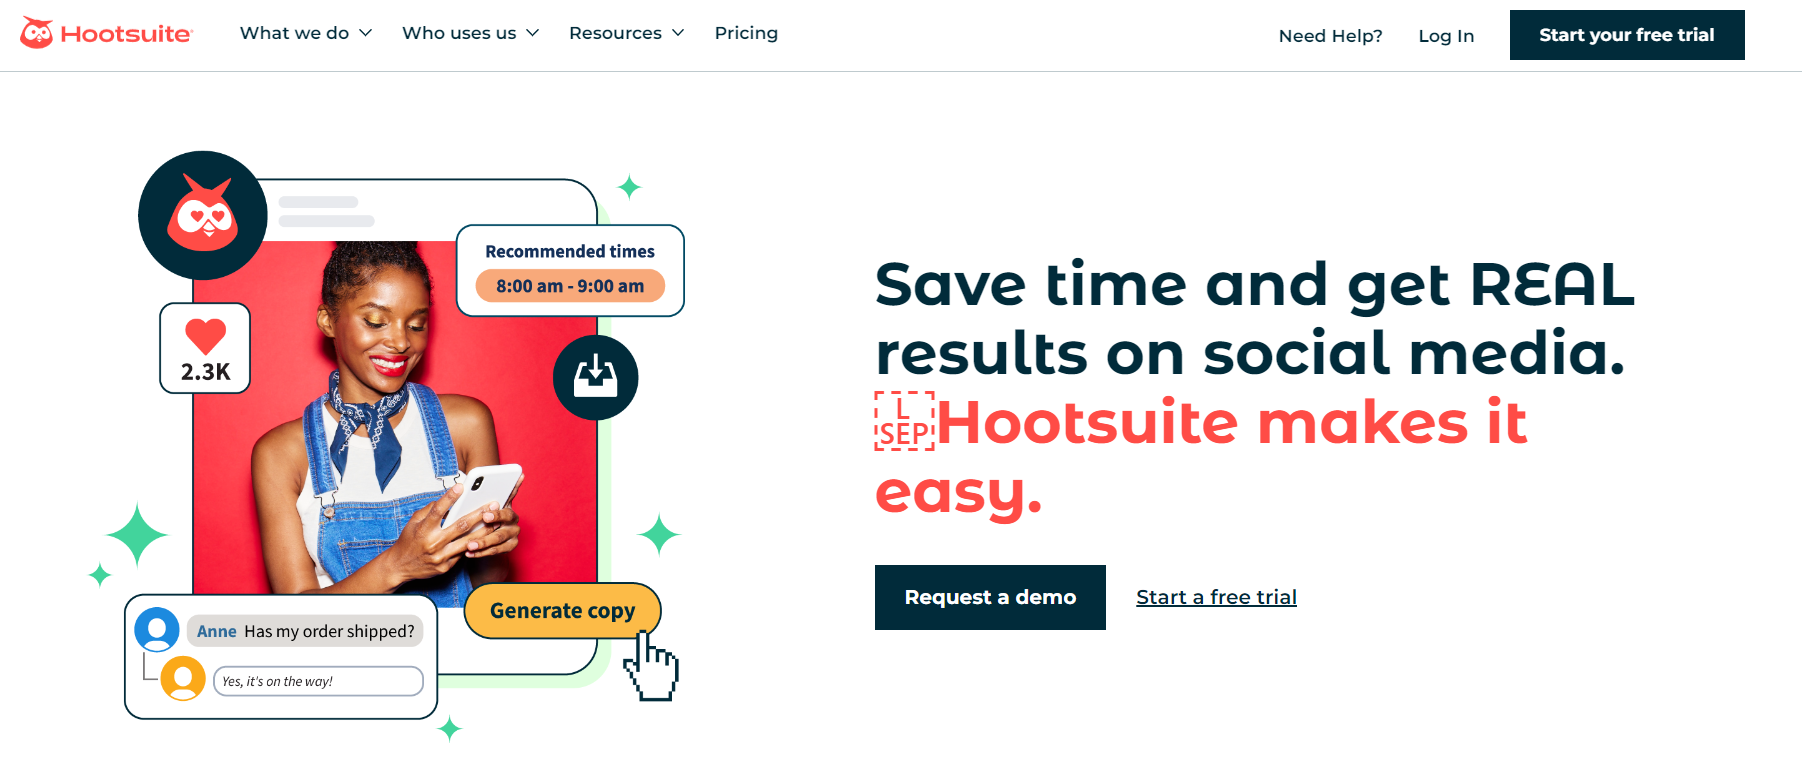 The image is of the Hootsuite homepage, a CSAT tool for measuring customer satisfaction. 